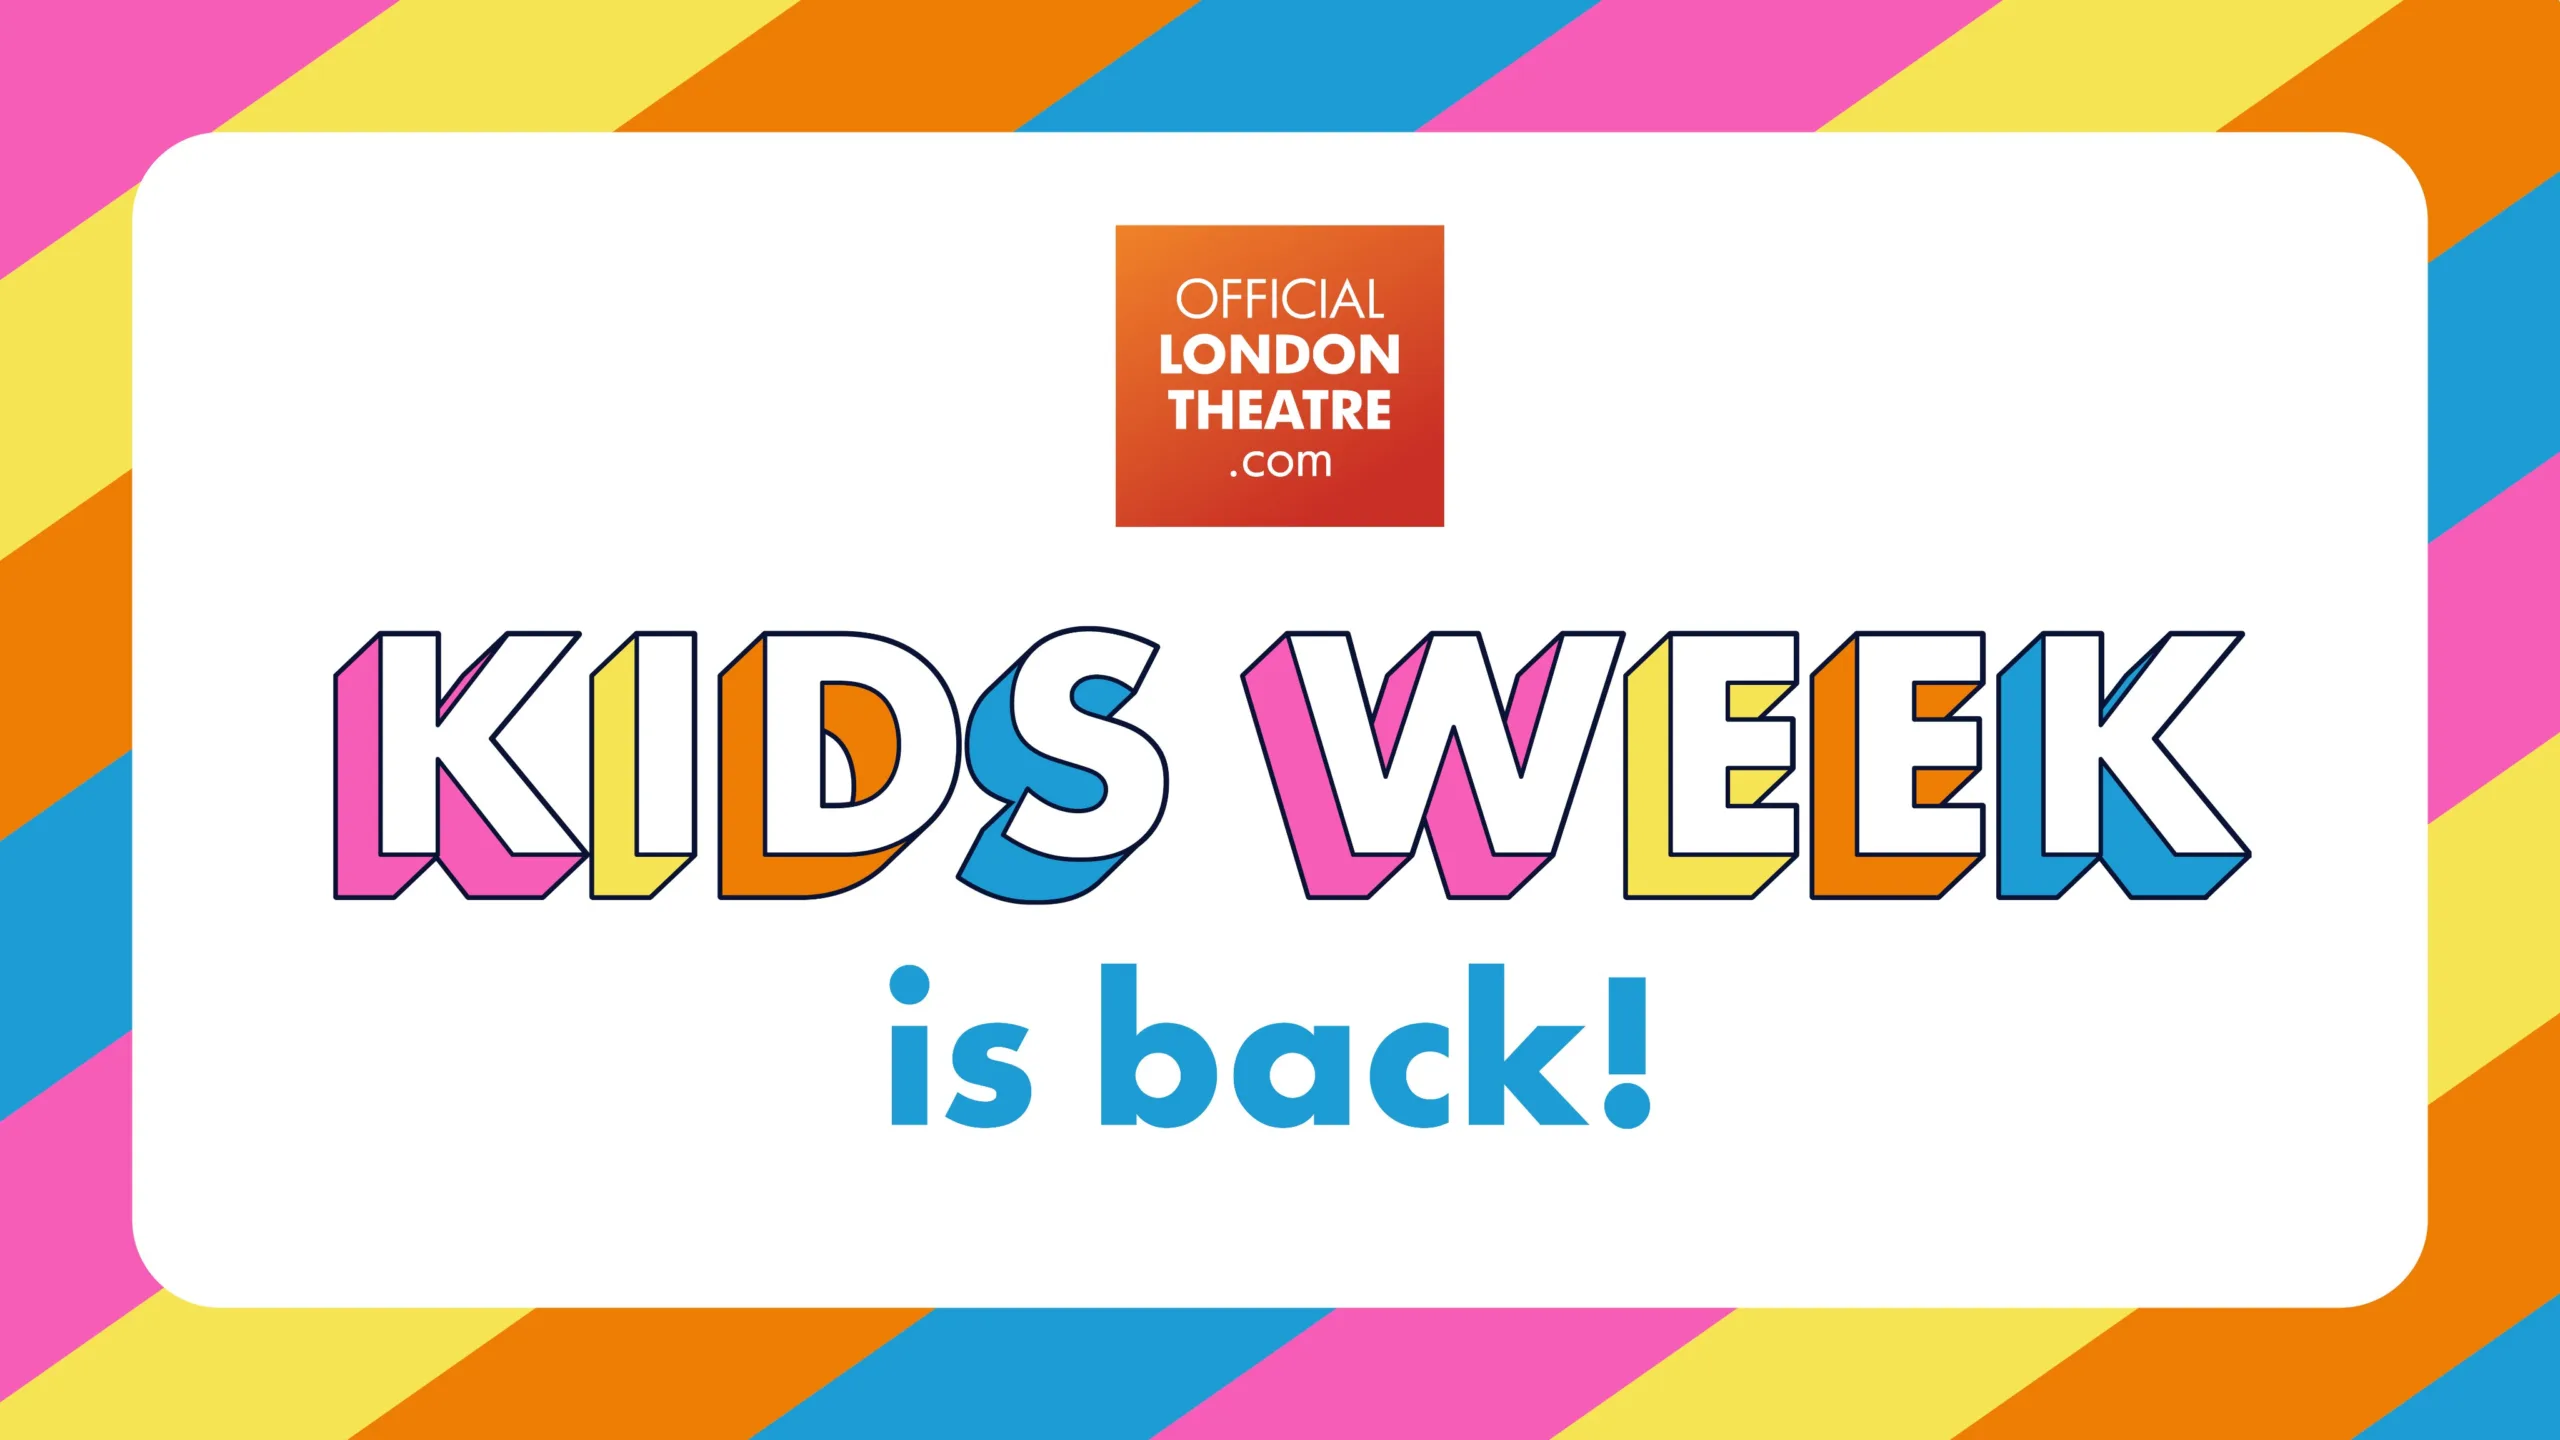 YOUR BEWS – YOUTH/STUDENT/GRADUATE – Kids Week is Back!